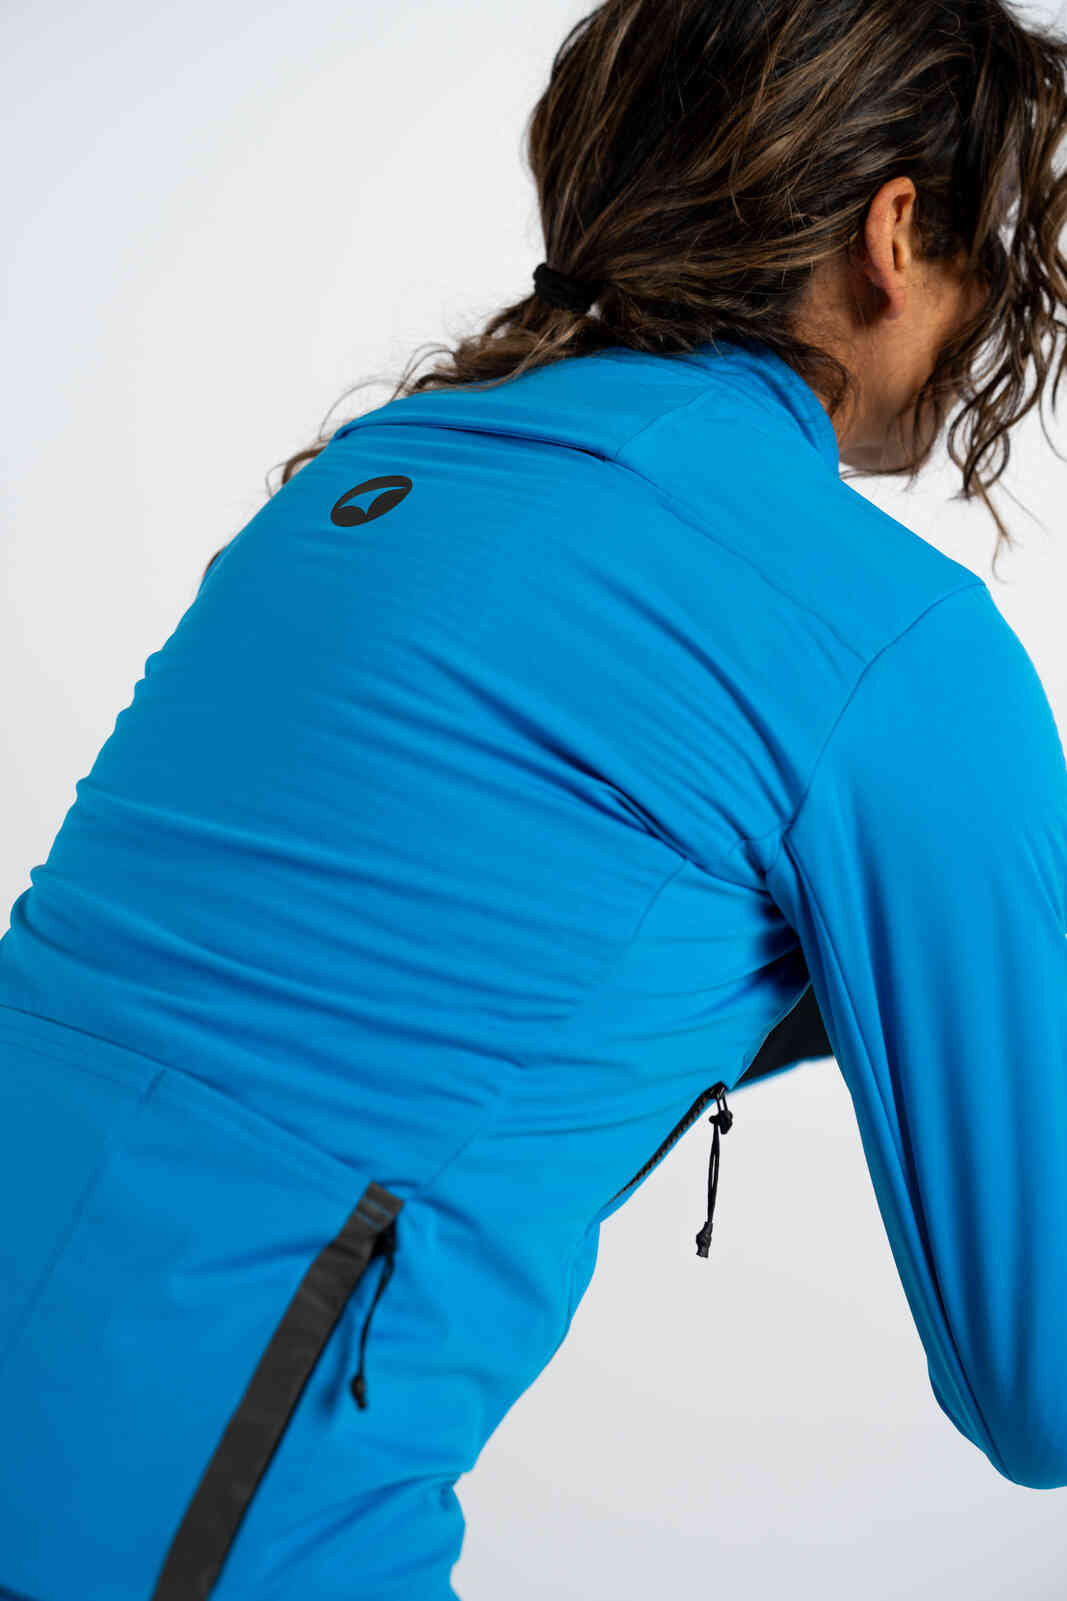 Women's Blue Winter Cycling Jacket - Back Rider Position